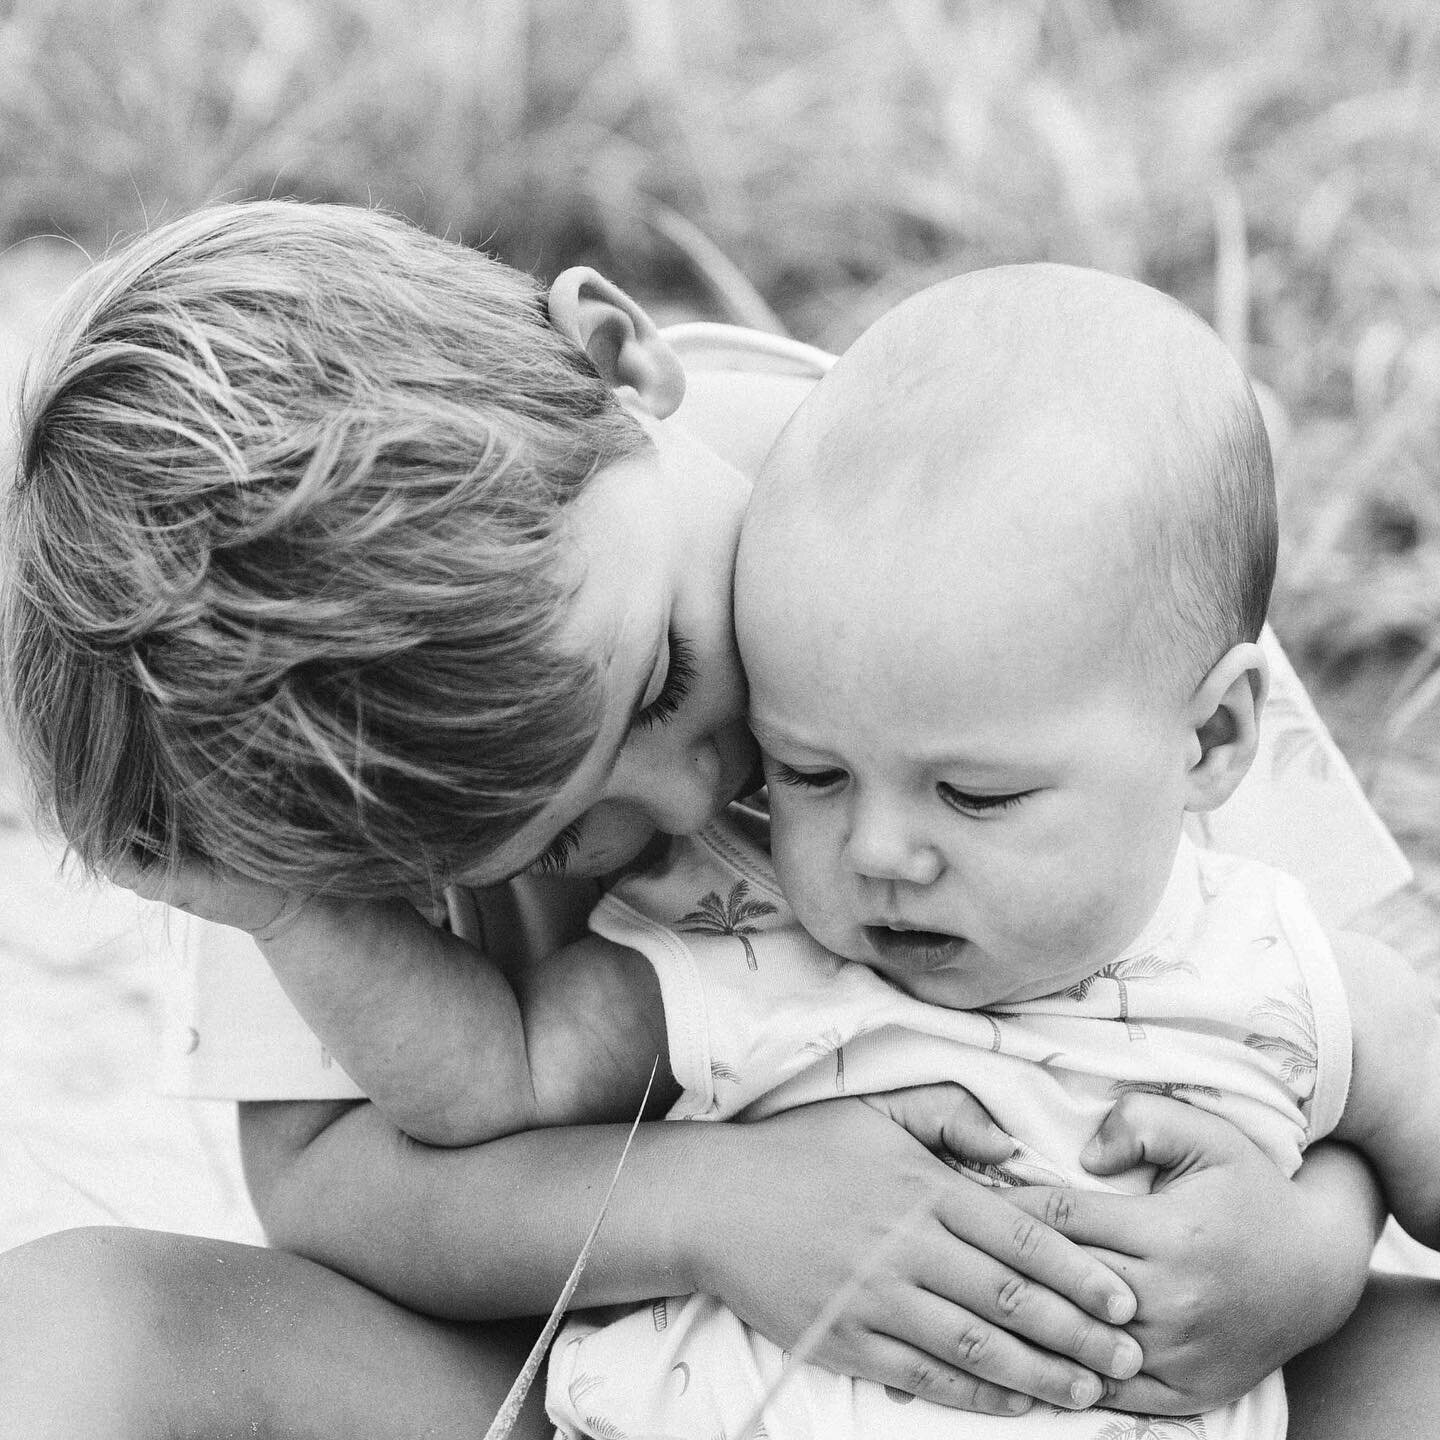 There is nothing more beautiful than witnessing the tenderness and pure love between siblings. Xavier adores his little brother Luca and there was no prompting or direction given during these moments. Makes your heart melt.

*GIFT VOUCHERS AVAILABLE*